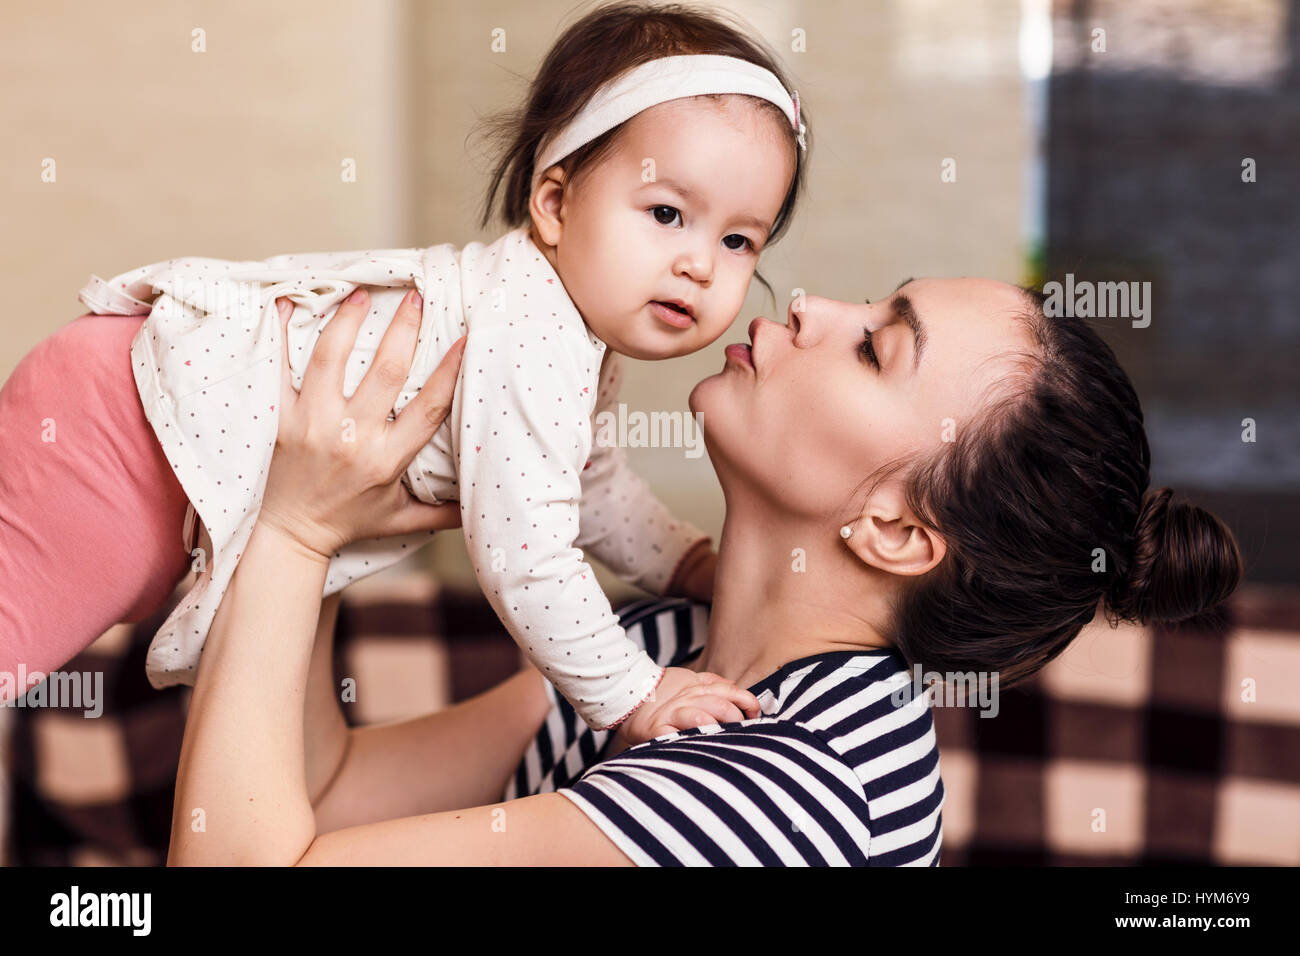 Young happy woman holding baby girl in hands. Stock Photo